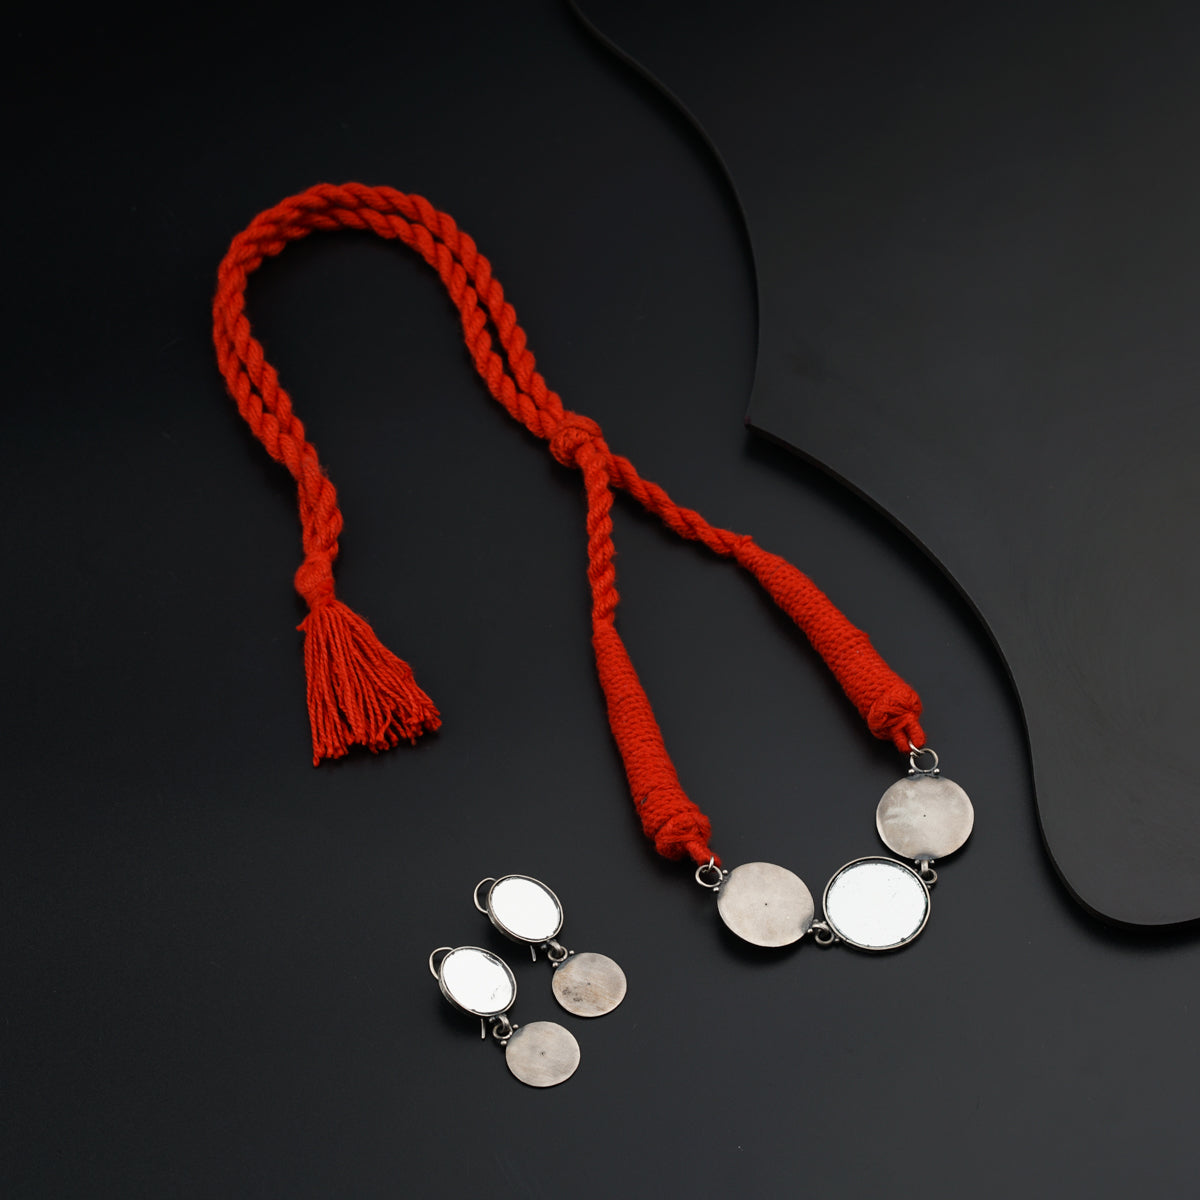 a pair of earrings and a red rope on a black surface